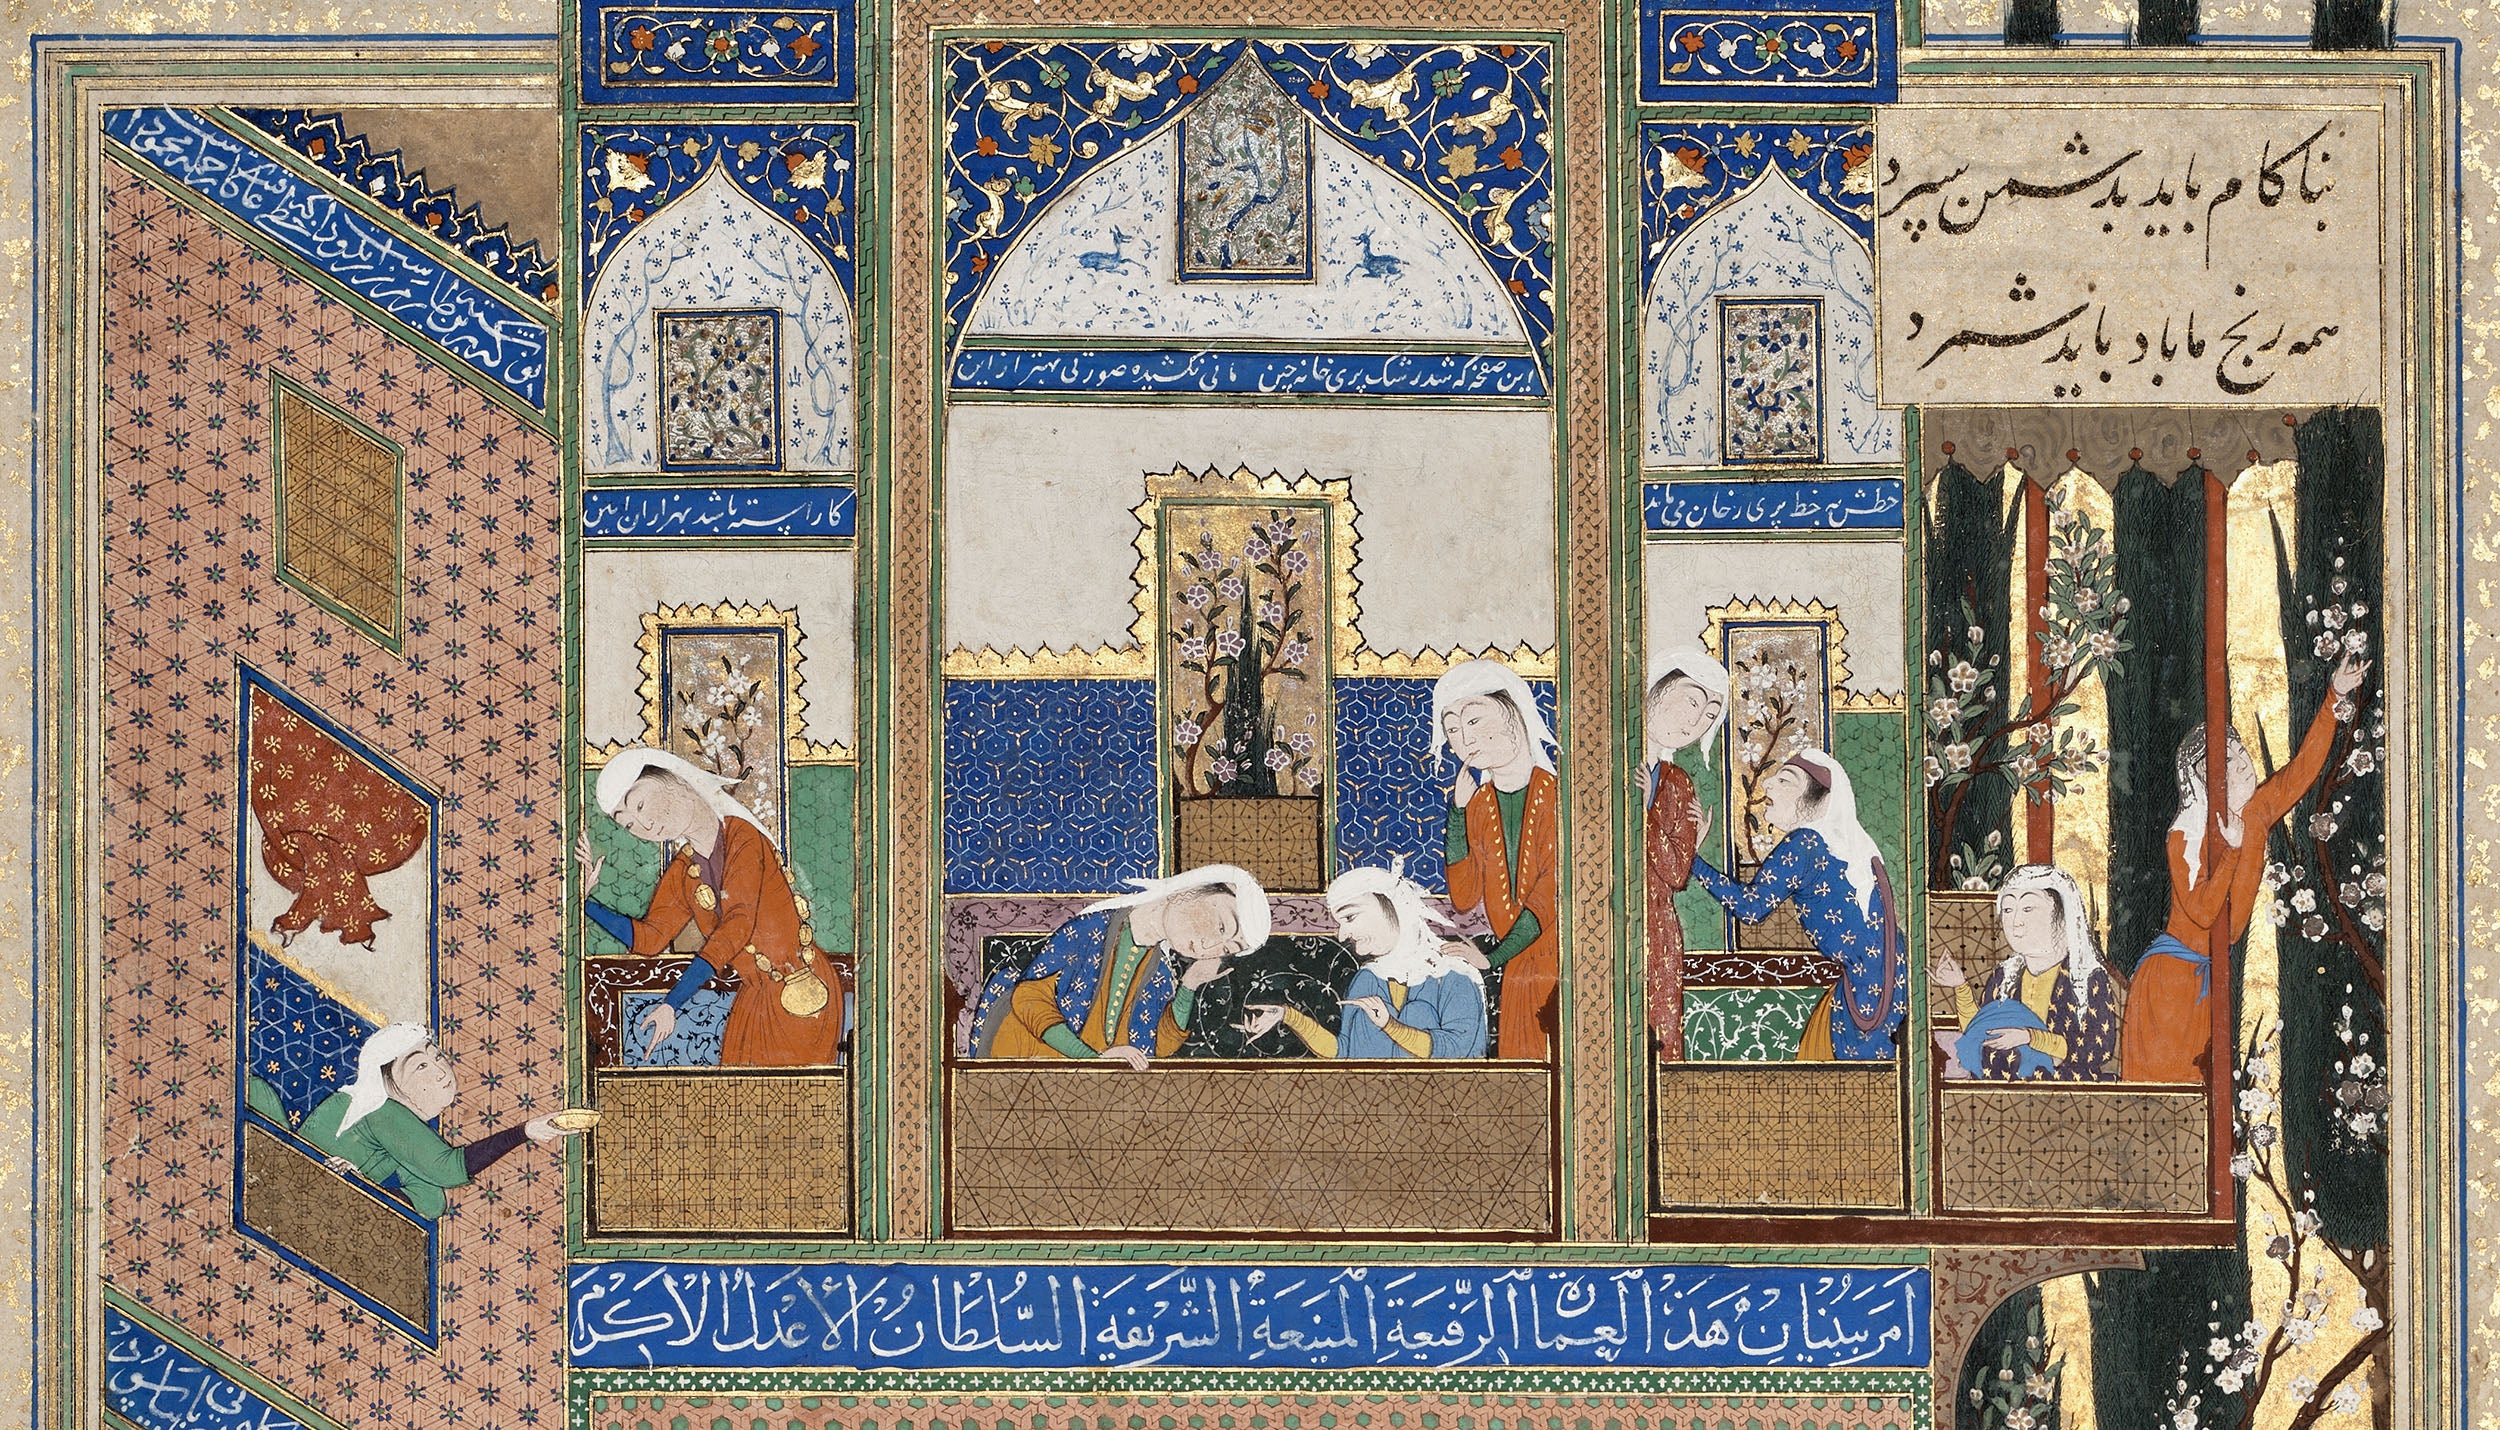 “Rudaba’s Parents Converse about her Love for Zal”, folio 77v from the Shahnama of Shah Tahmasp, attributed to ‘Abdal-‘Aziz under the direction of Sultan Muhammad (both Persian, active first half of 16th century), Iran, c. 1520–1540, ink, opaque watercolor, gold, and silver on paper, The Hossein Afshar Collection at the Museum of Fine Arts, Houston